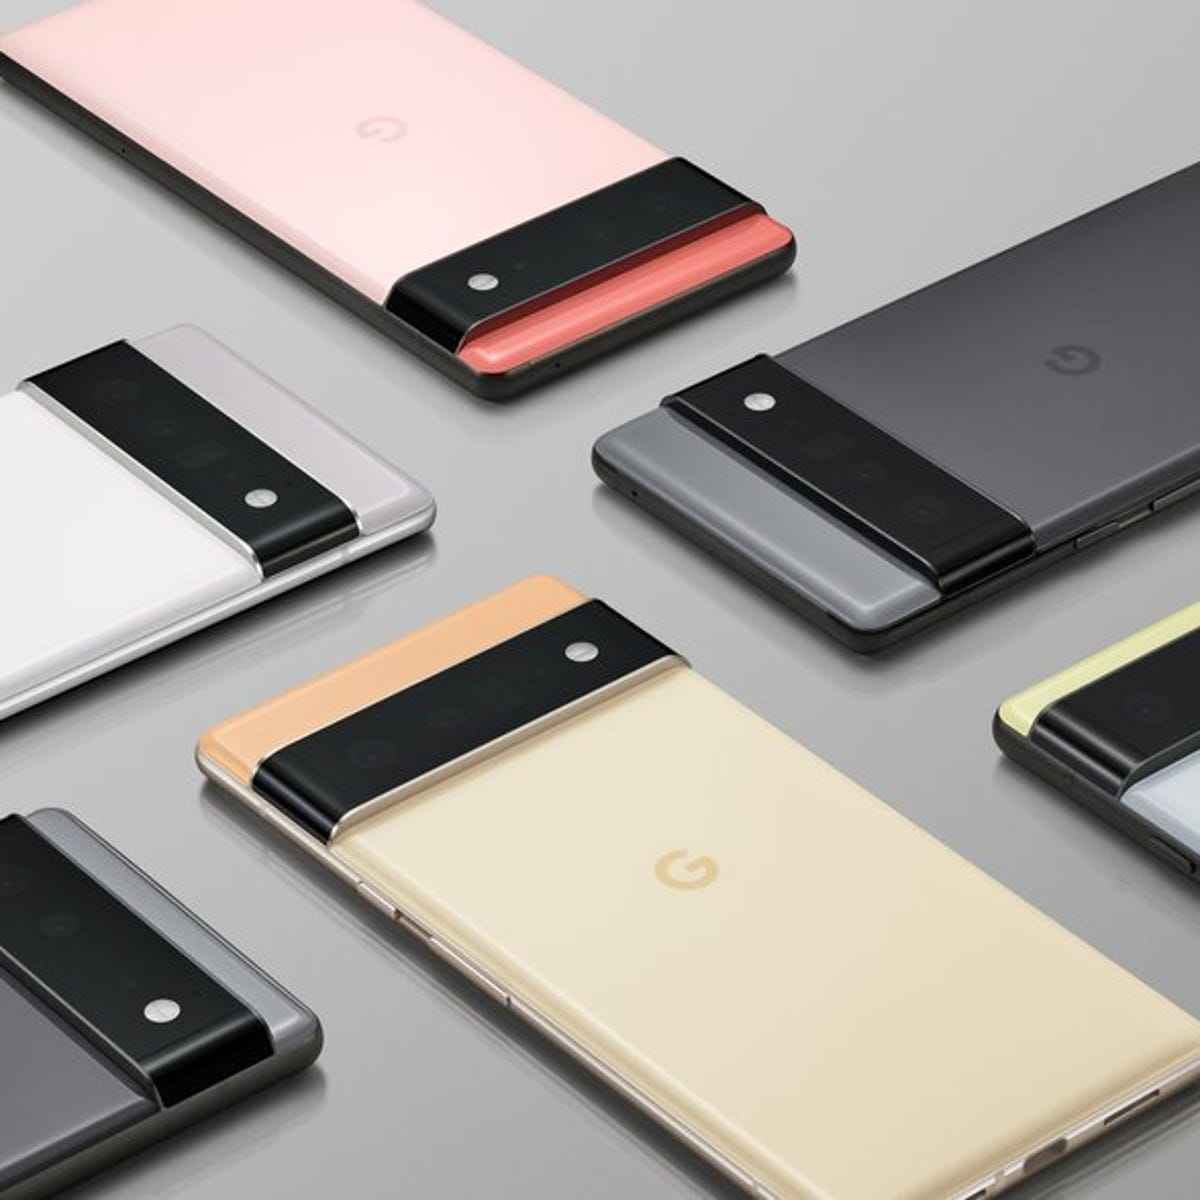 The Google Pixel 6a is likely to be launched in May this year and here are our expectations